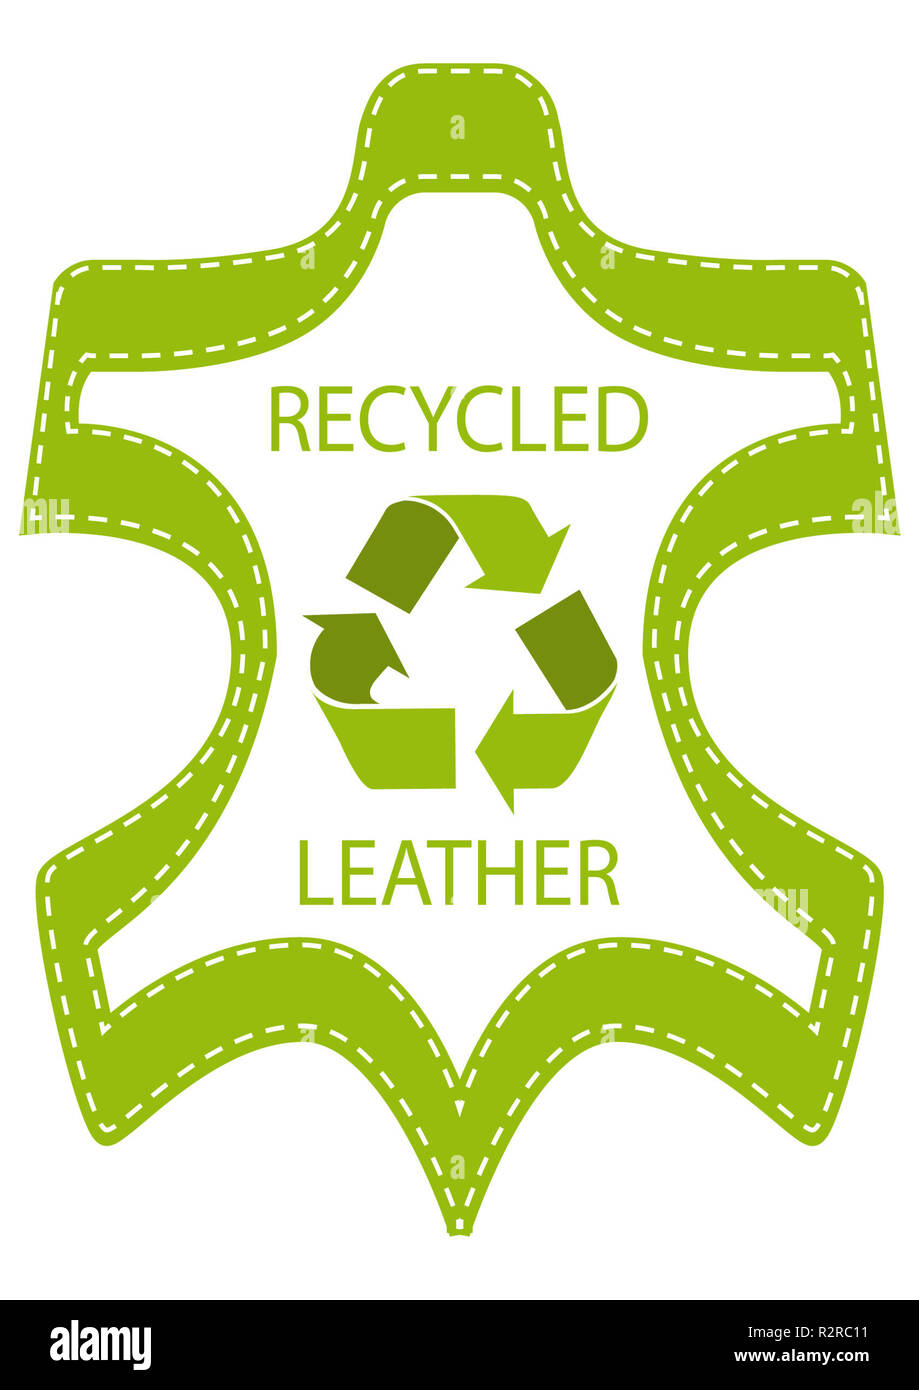 recycled leather Stock Photo